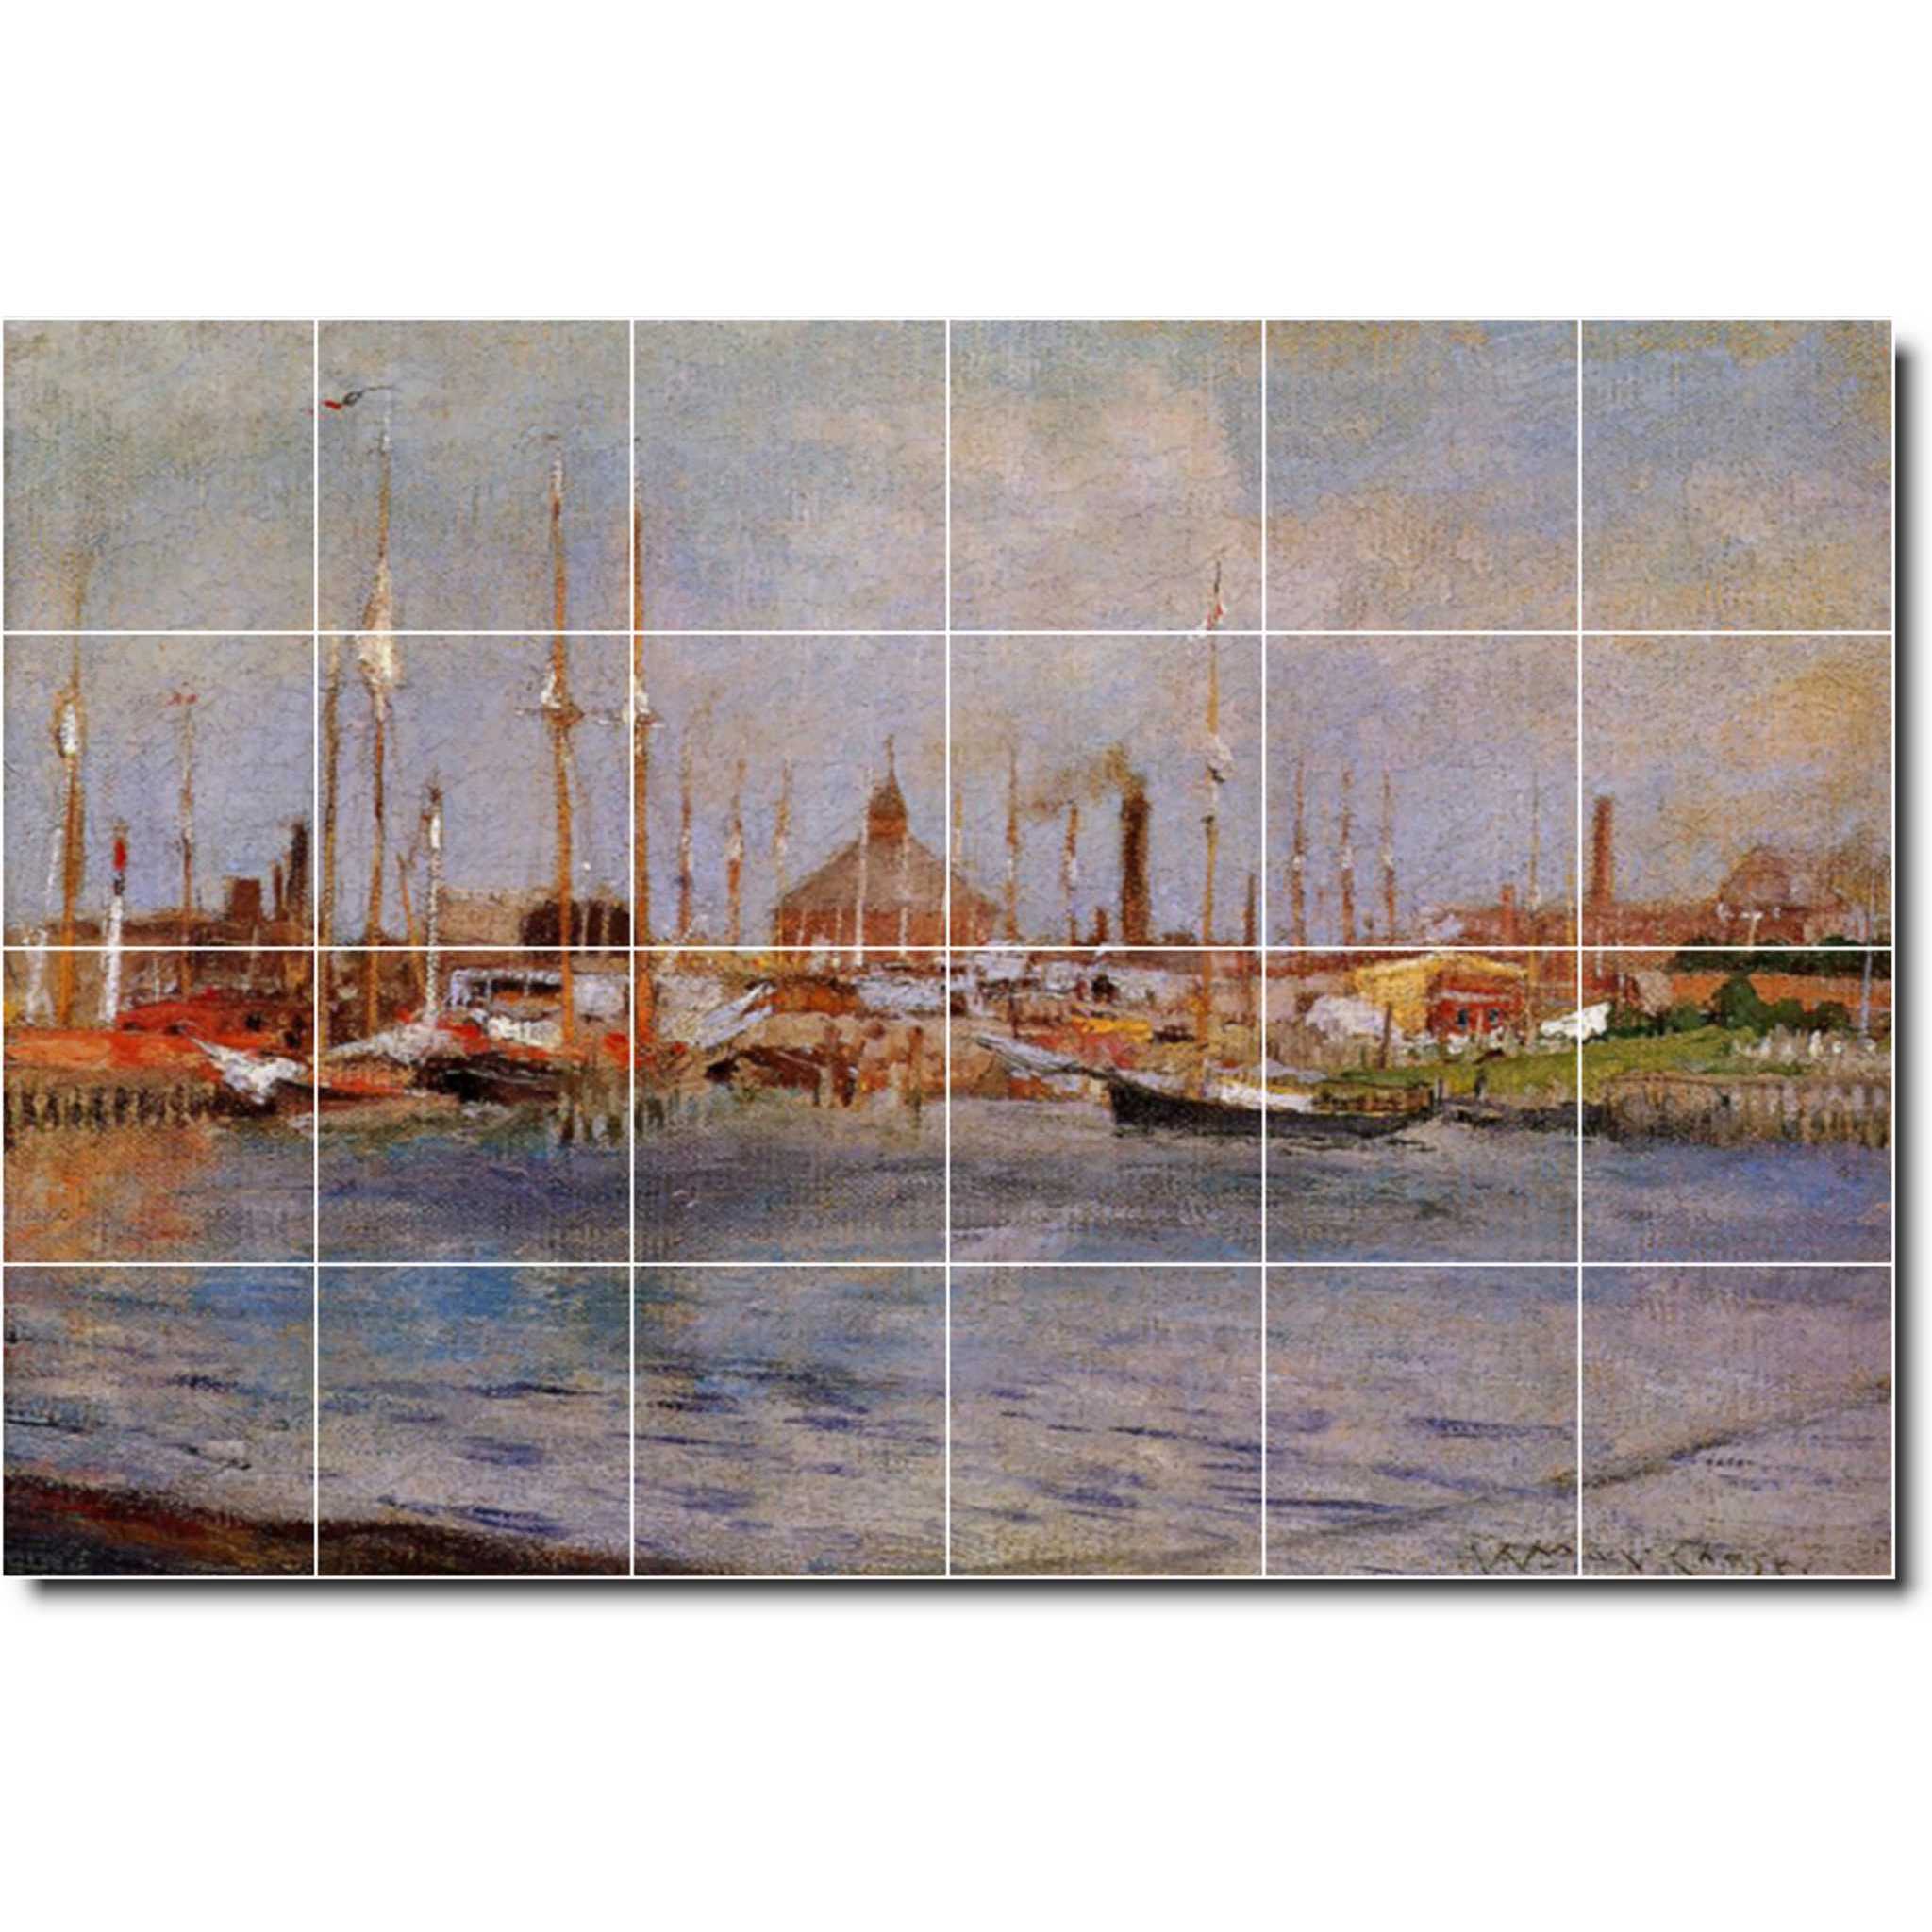 william chase waterfront painting ceramic tile mural p01574